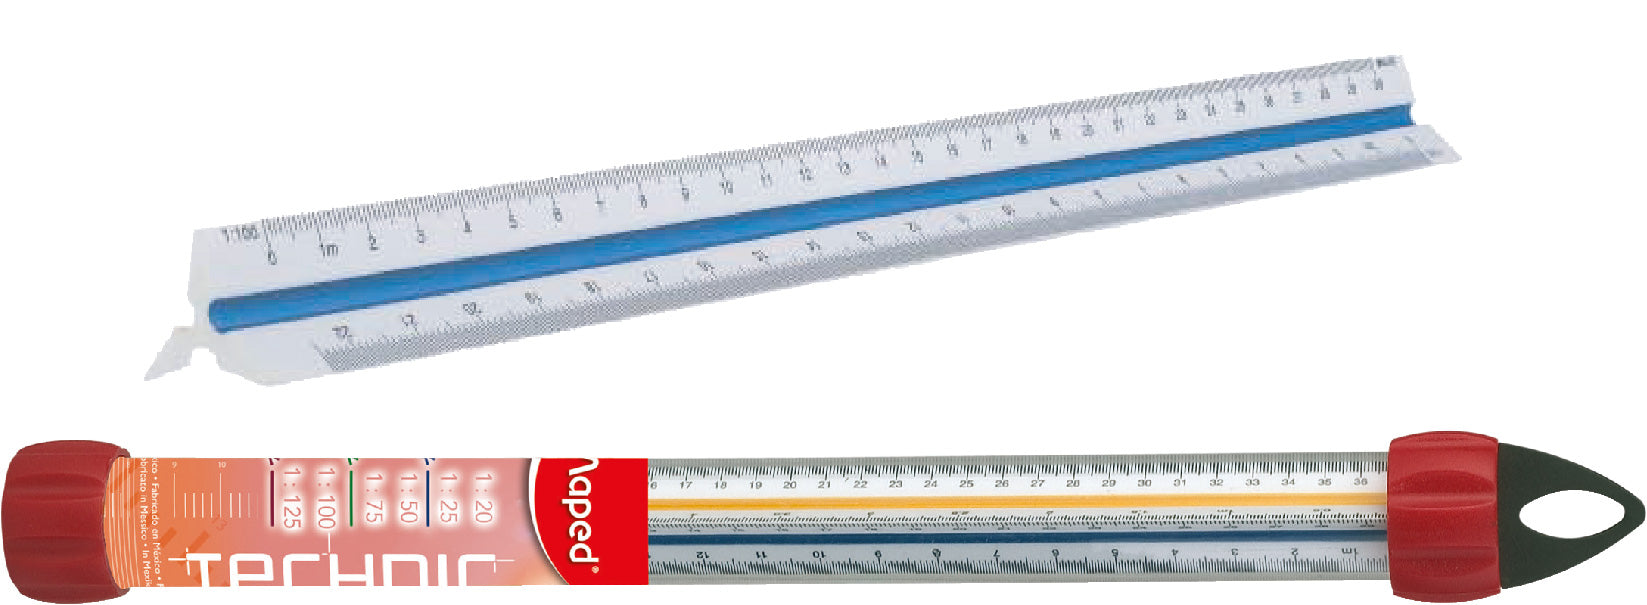 Architect'S Scale Ruler 1:100, 1:200, 1:250, 1:300, 1:400, 1:500